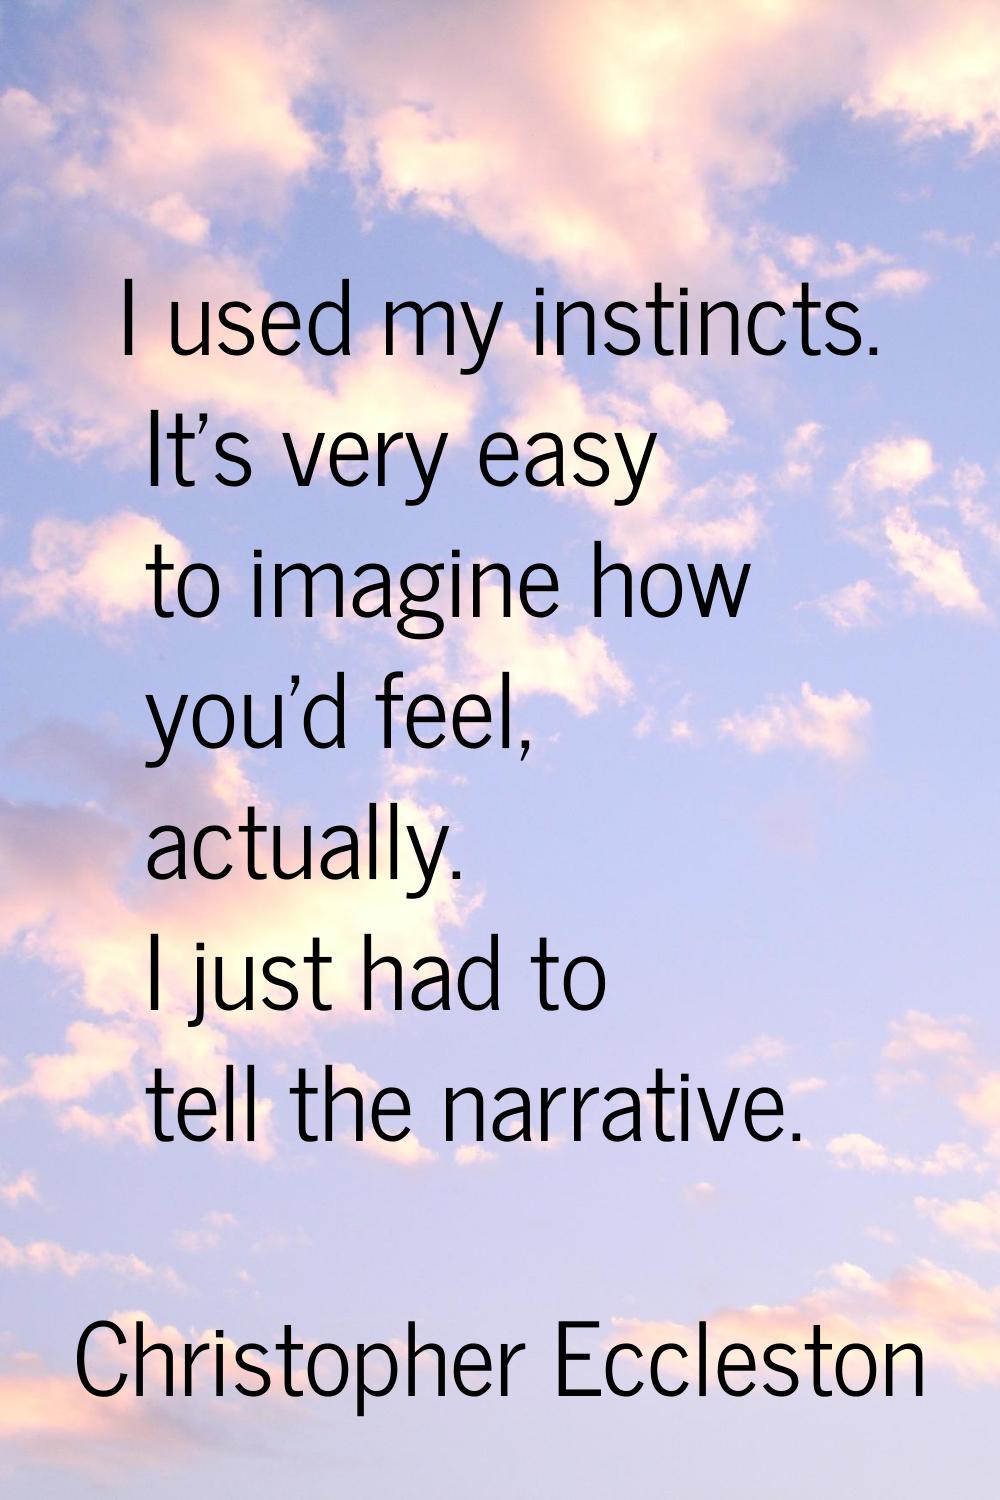 I used my instincts. It's very easy to imagine how you'd feel, actually. I just had to tell the nar